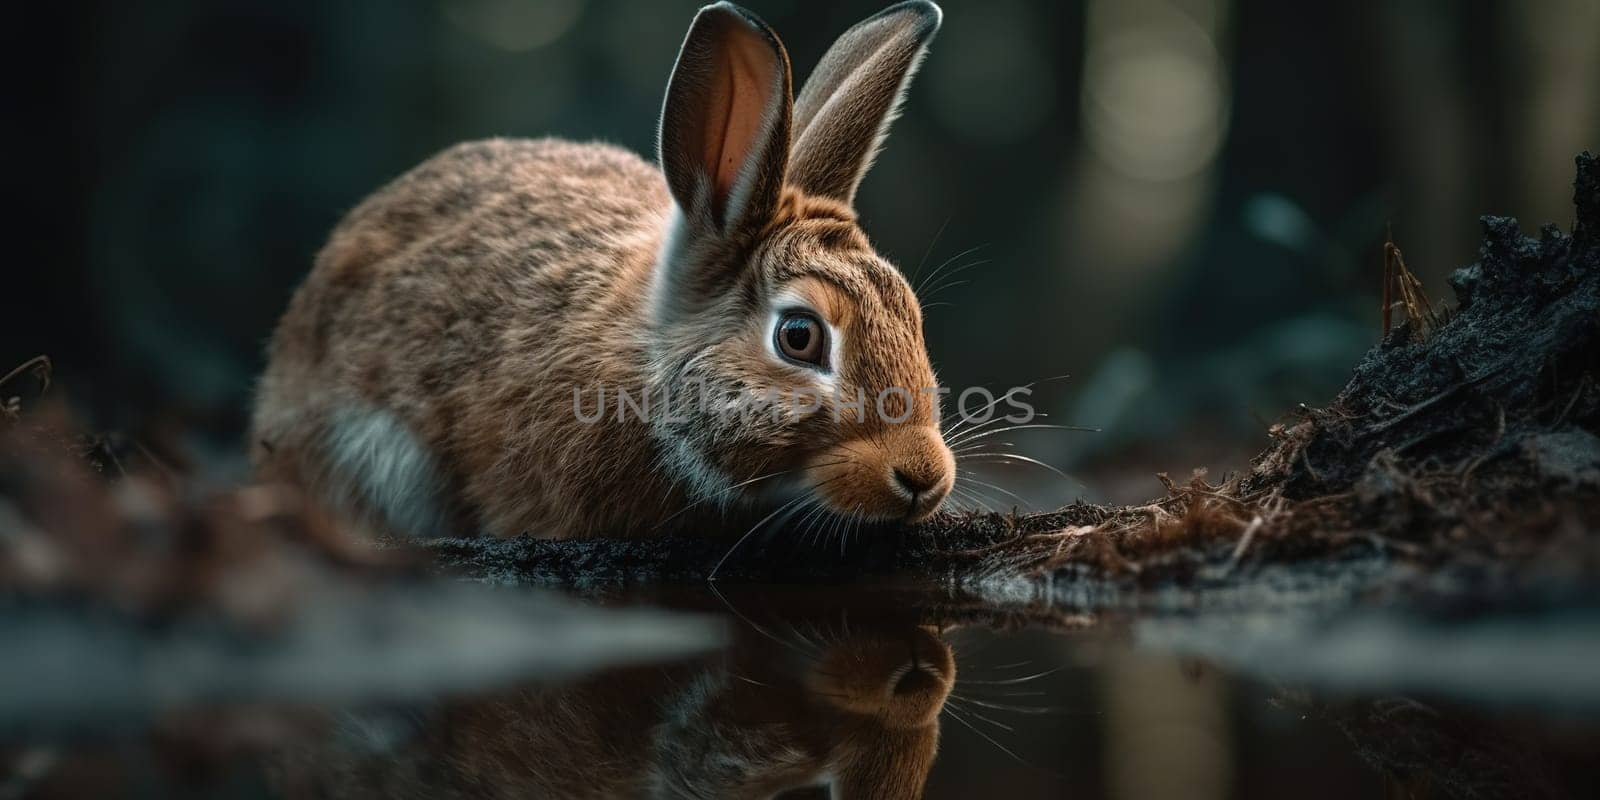 Big Wild Rabbit Drinks Water From The Creek In The Forest, Animal In Natural Habitat